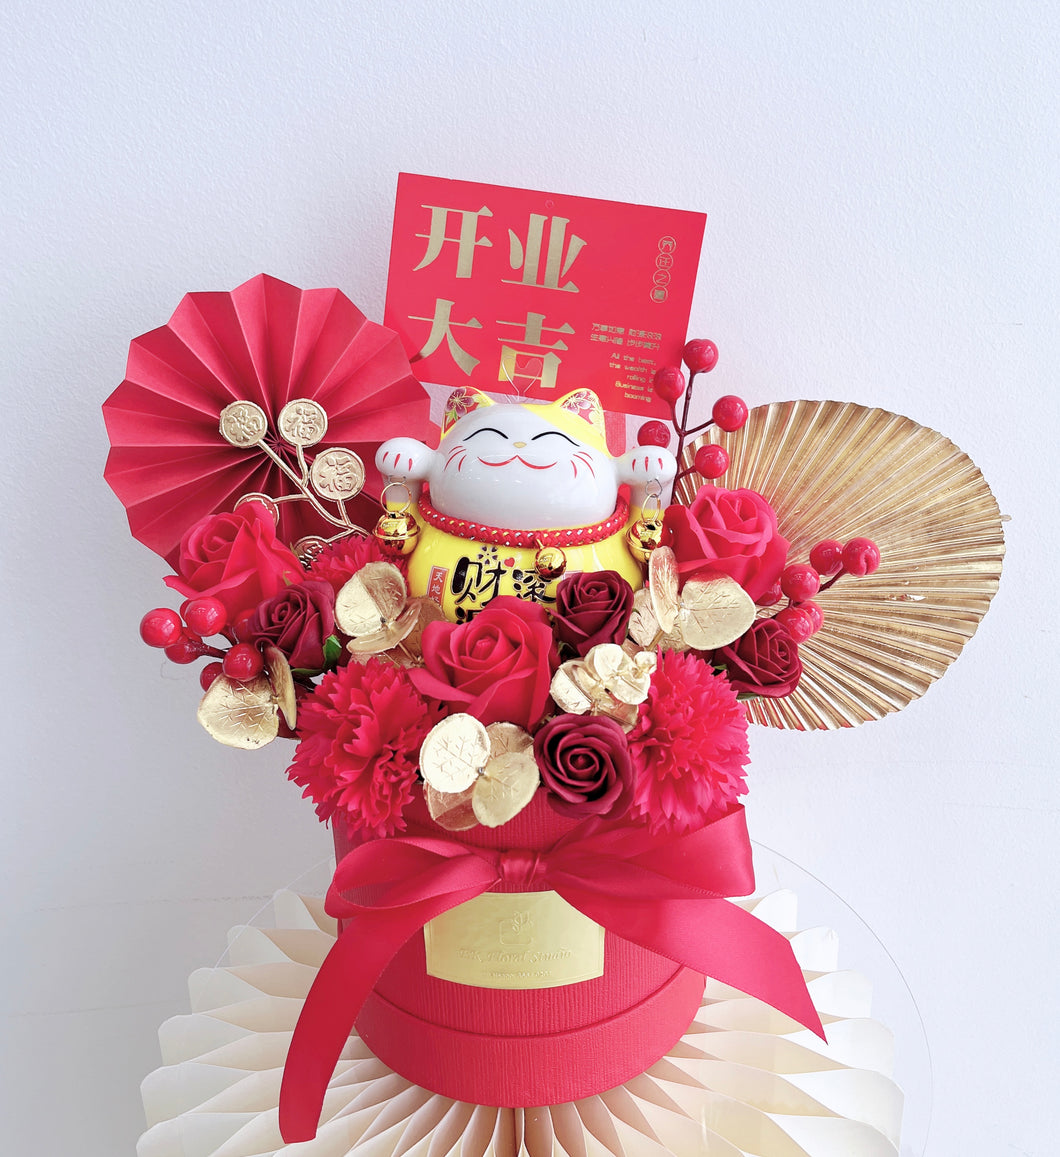 Prosperous Soap Flower bucket with Fortune Cat 旺旺招财猫香皂开业花桶